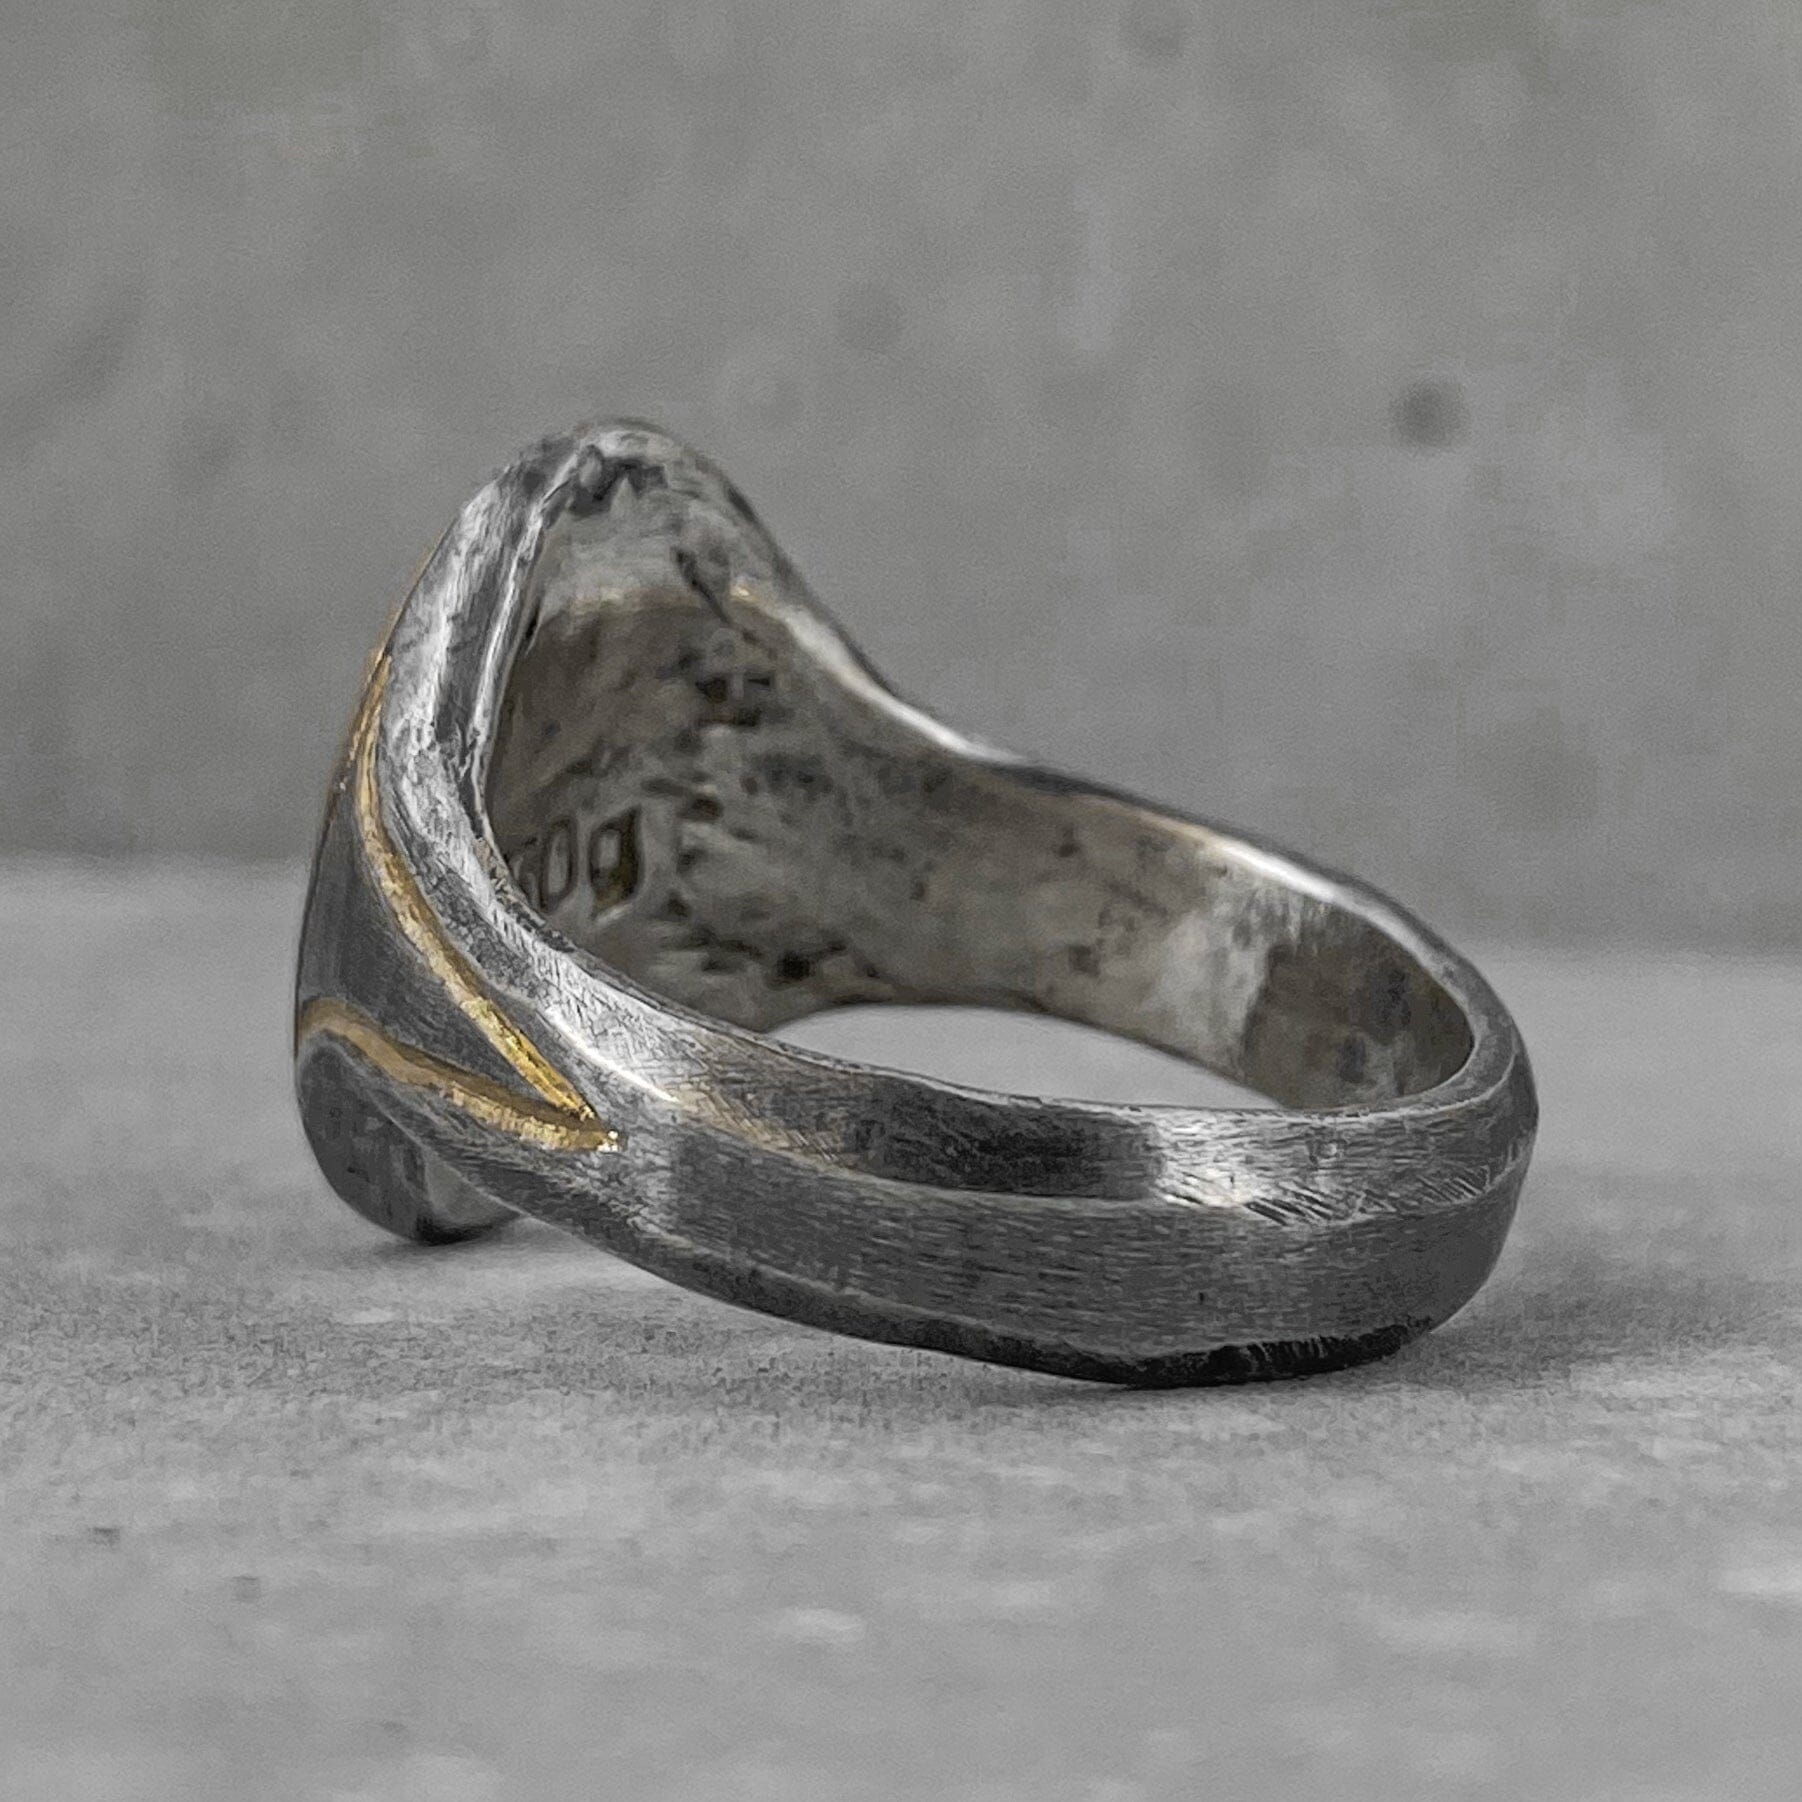 Oval ring- Elegant oval ring with gold plated elements and scratched texture Rings with smooth texture Project50g 